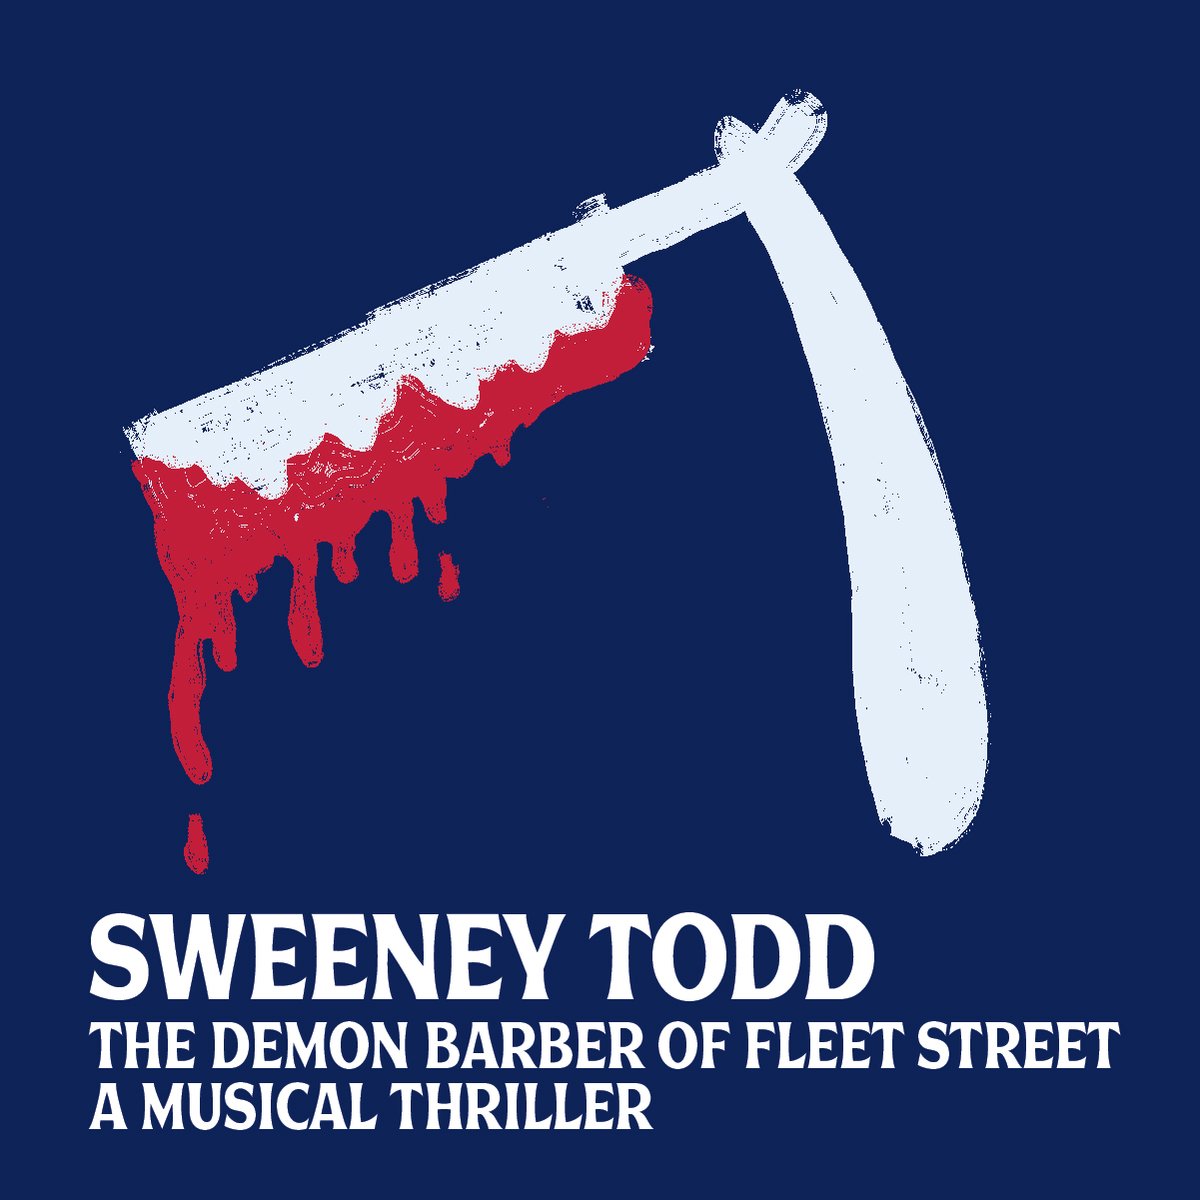 ICYHH, Sweeney Todd plays Feb. 16-21 in Murphy Hall. KU Opera & Symphony Orchestra members join Theatre & Dance students in this main stage production. Our box office staff can help find you a perfect seat. Box office hours: M-F noon-5pm Or visit: kutheatre.com/sweeney-todd 🩸🩸🩸